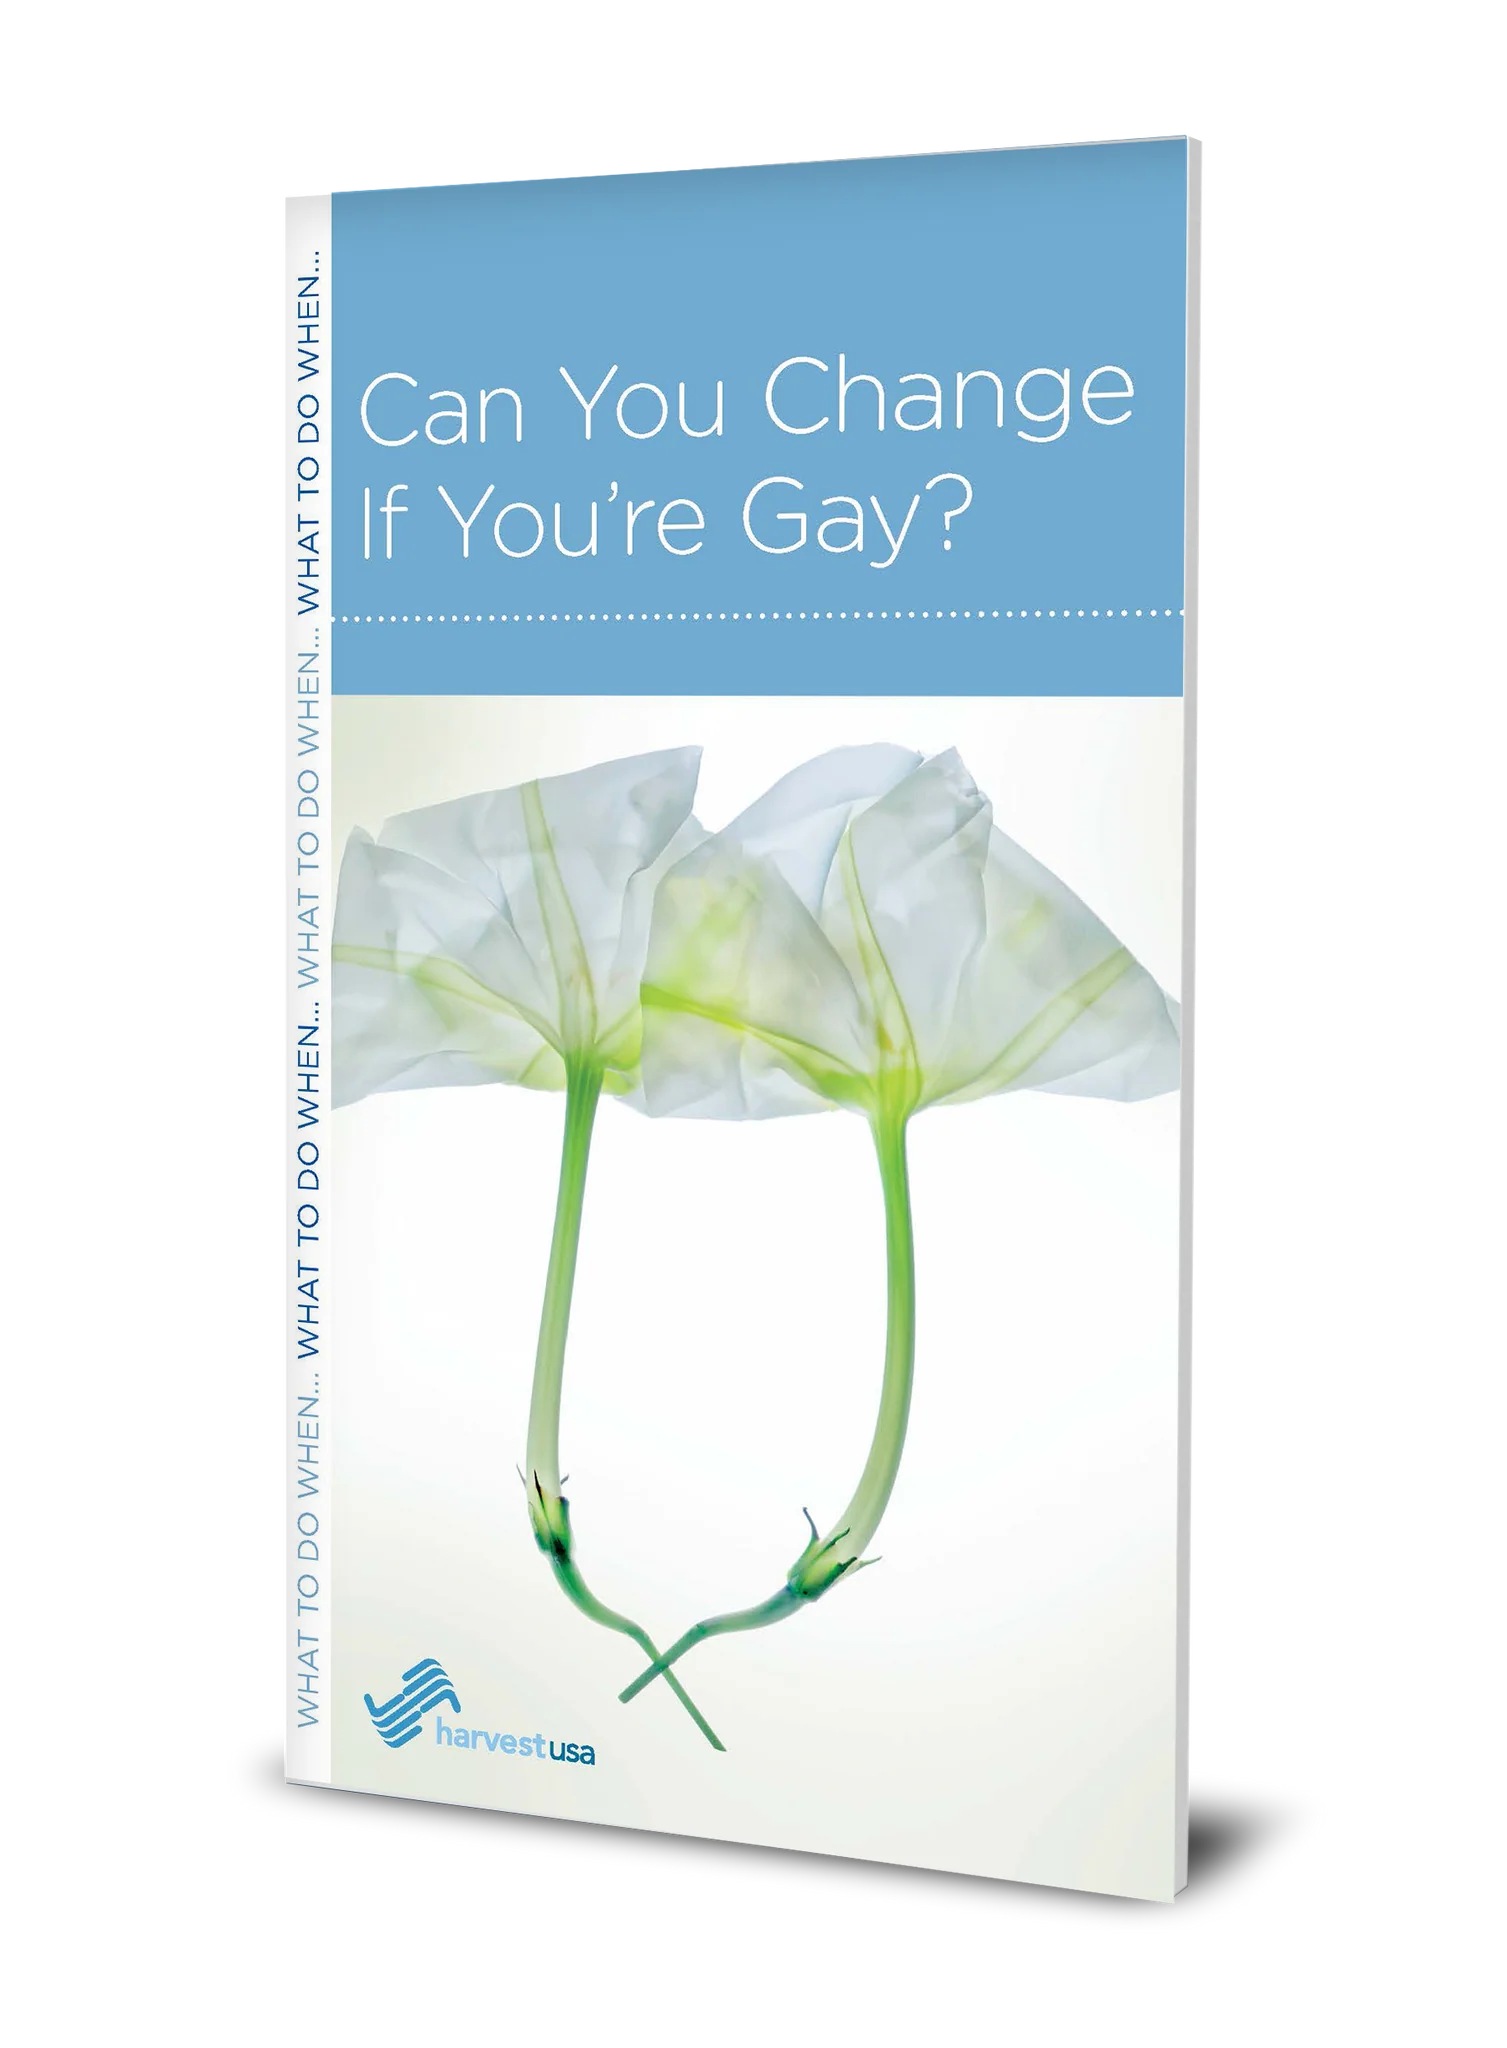 Can You Change If You’re Gay? (Minibook)